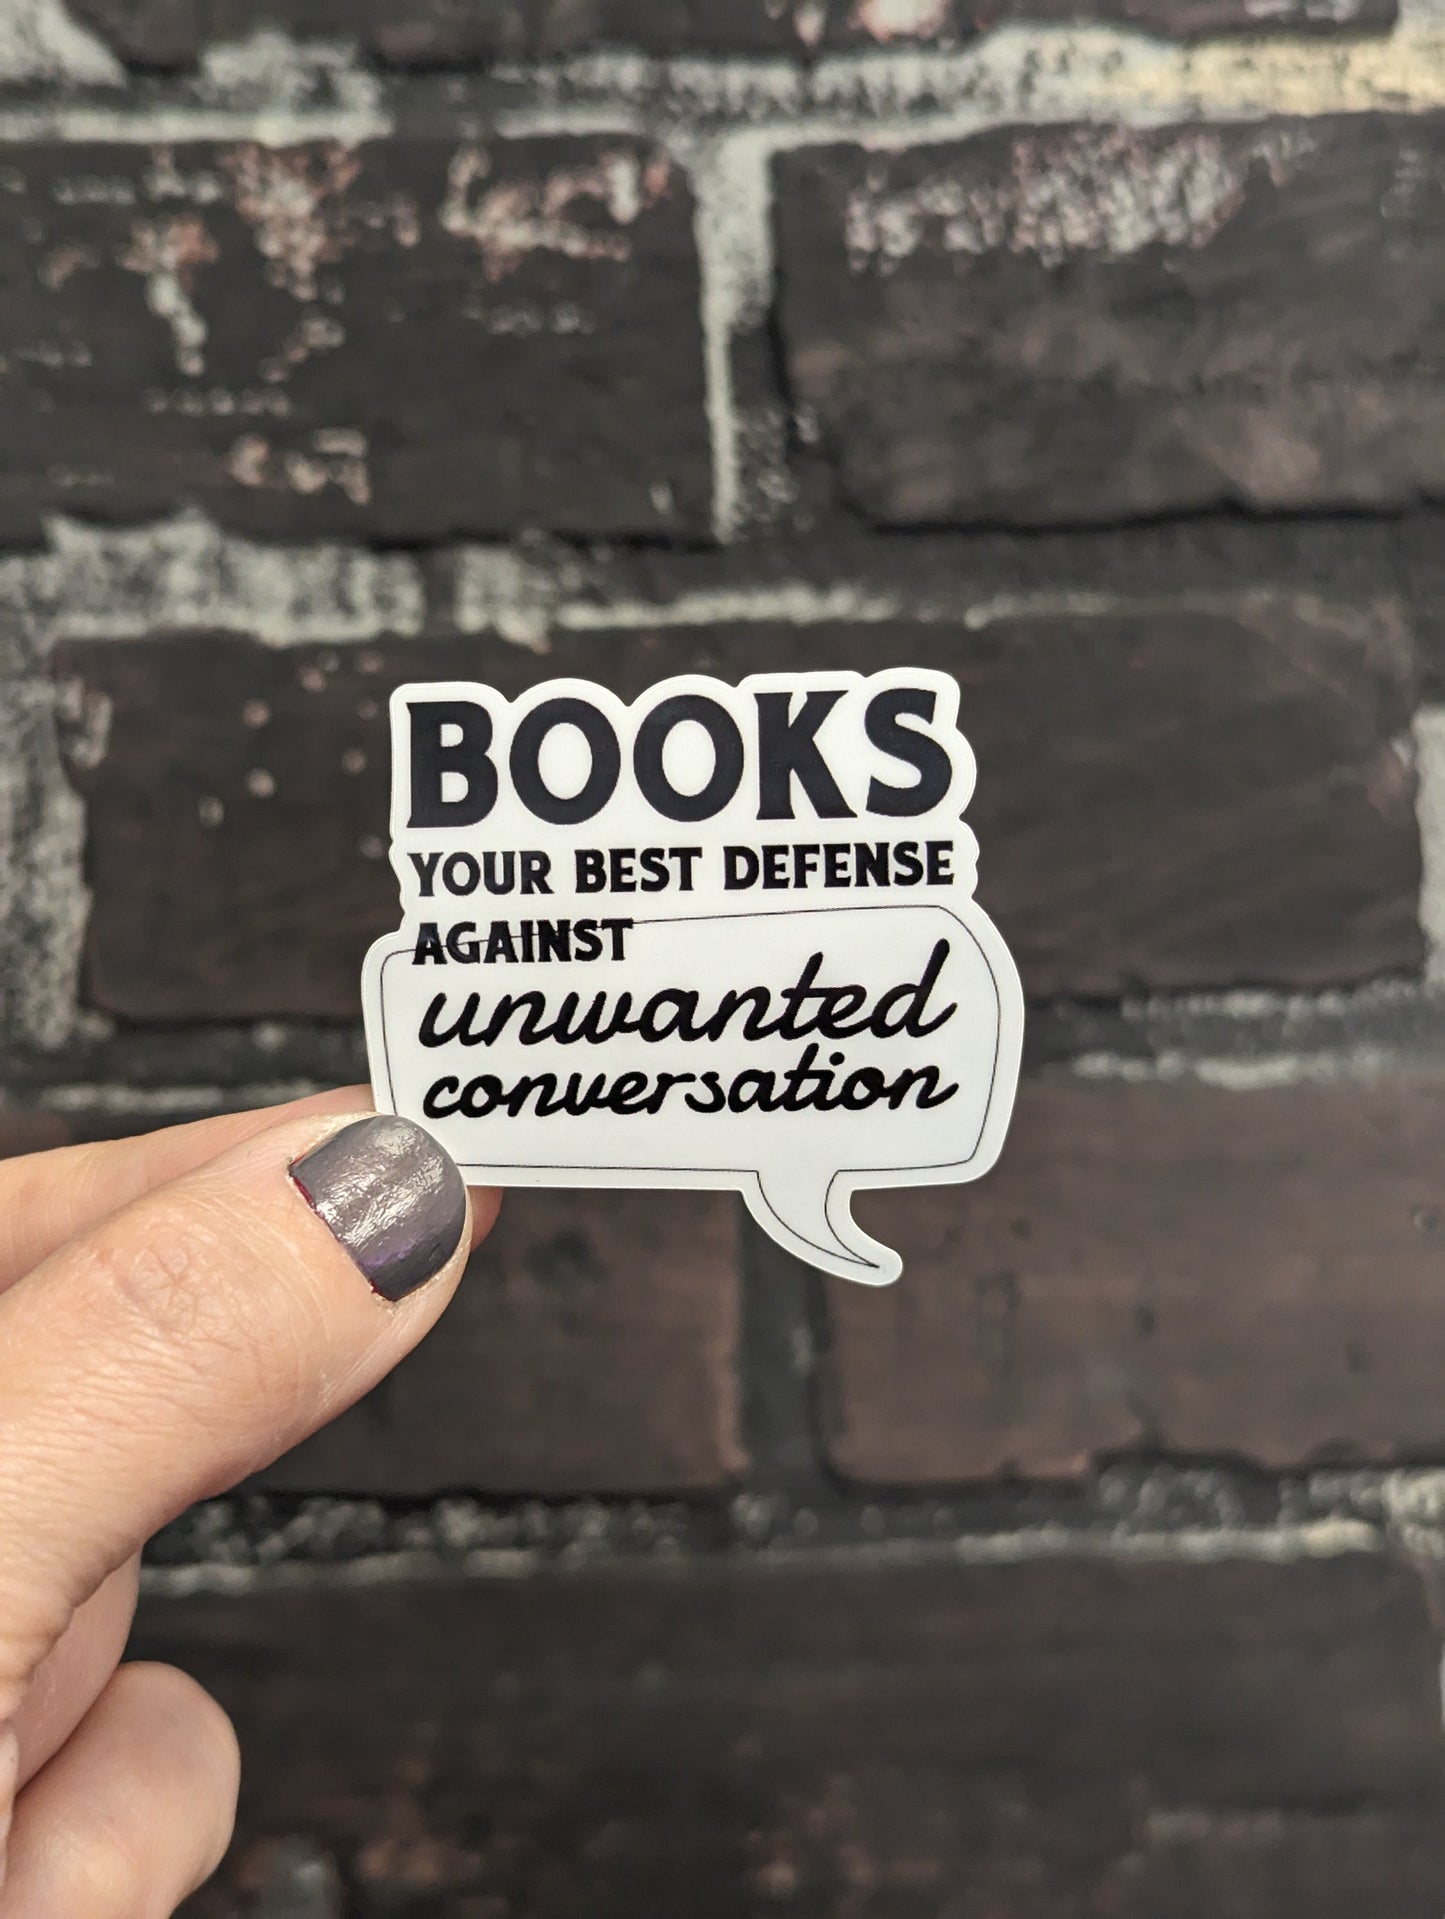 Books, your best defense against unwanted conversion, 2” Sticker